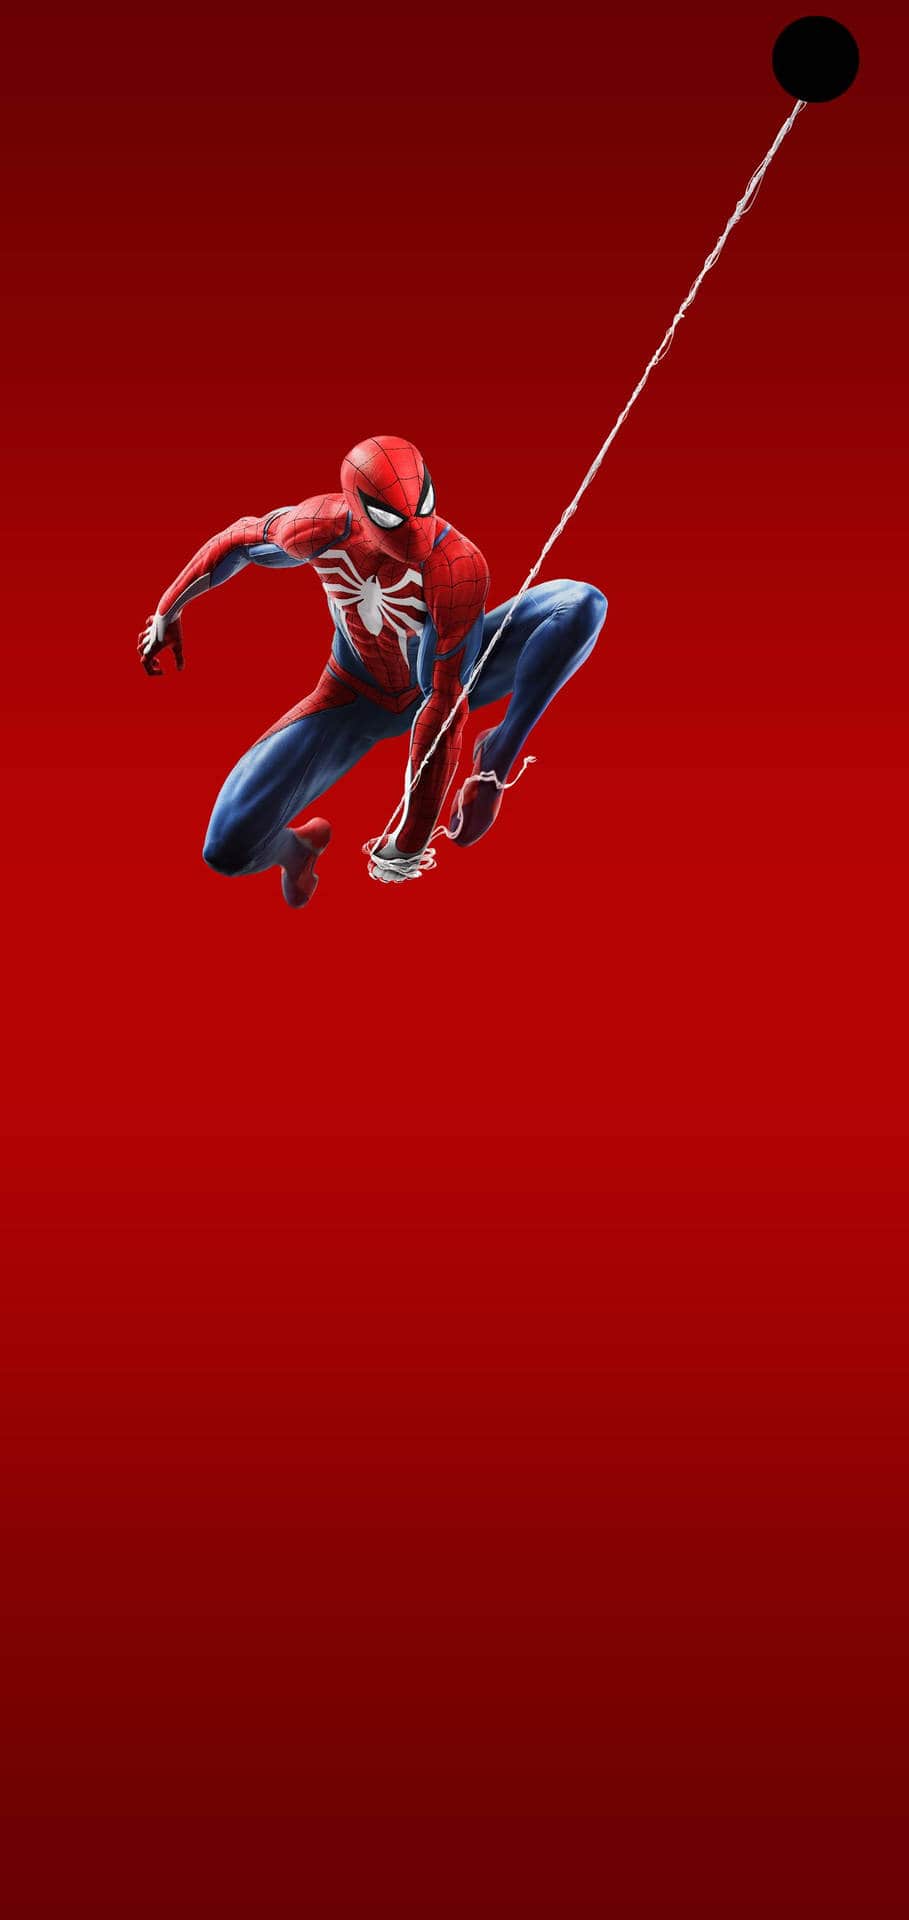 Spiderman Wallpapers Images Backgrounds Photos and Pictures